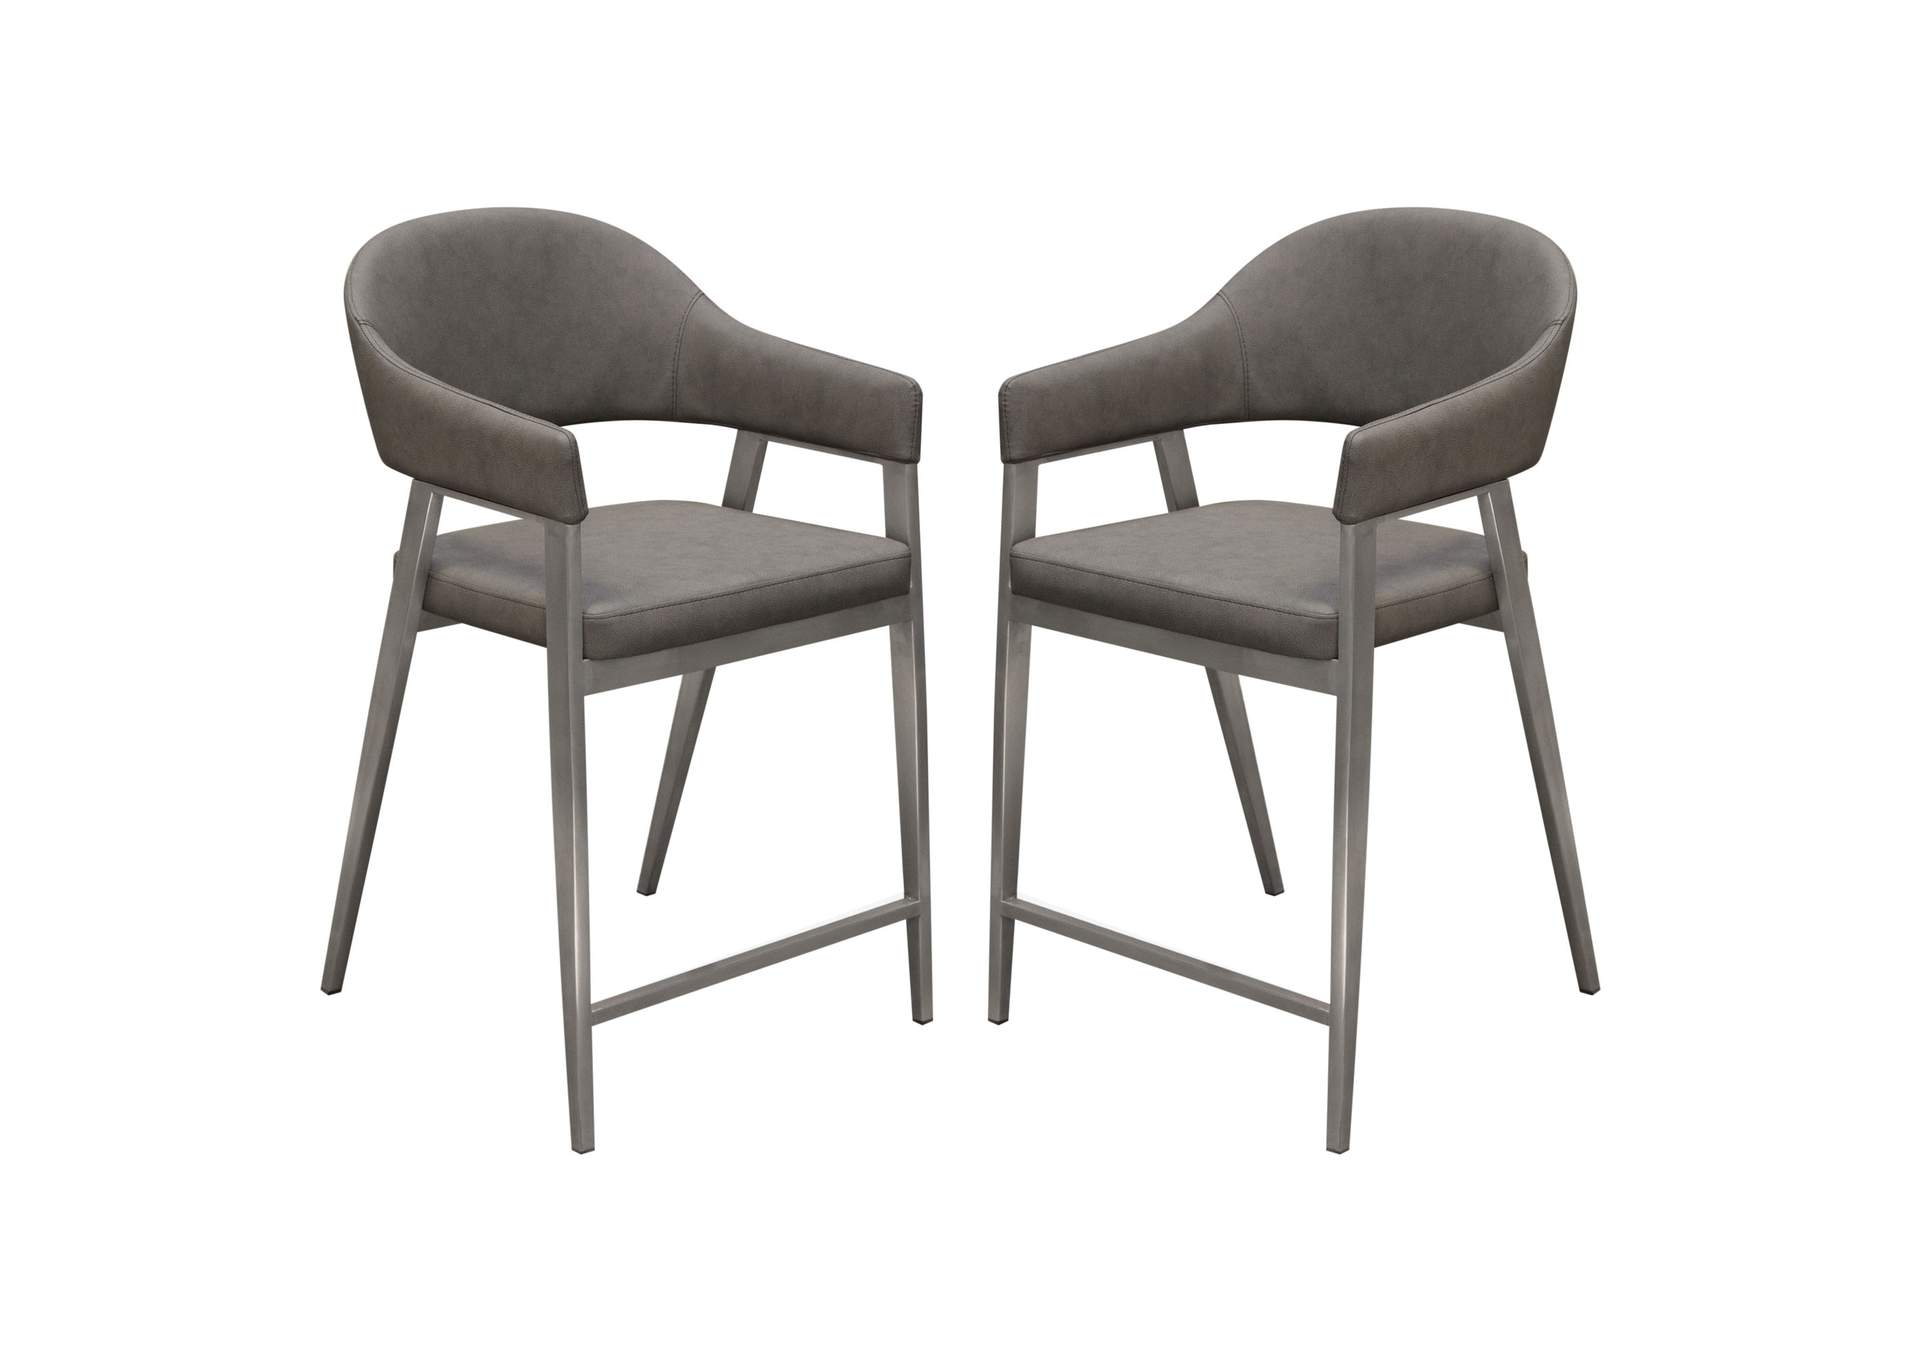 Adele Set of Two Counter Height Chairs in Grey Leatherette w/ Brushed Stainless Steel Leg by Diamond Sofa,Diamond Sofa